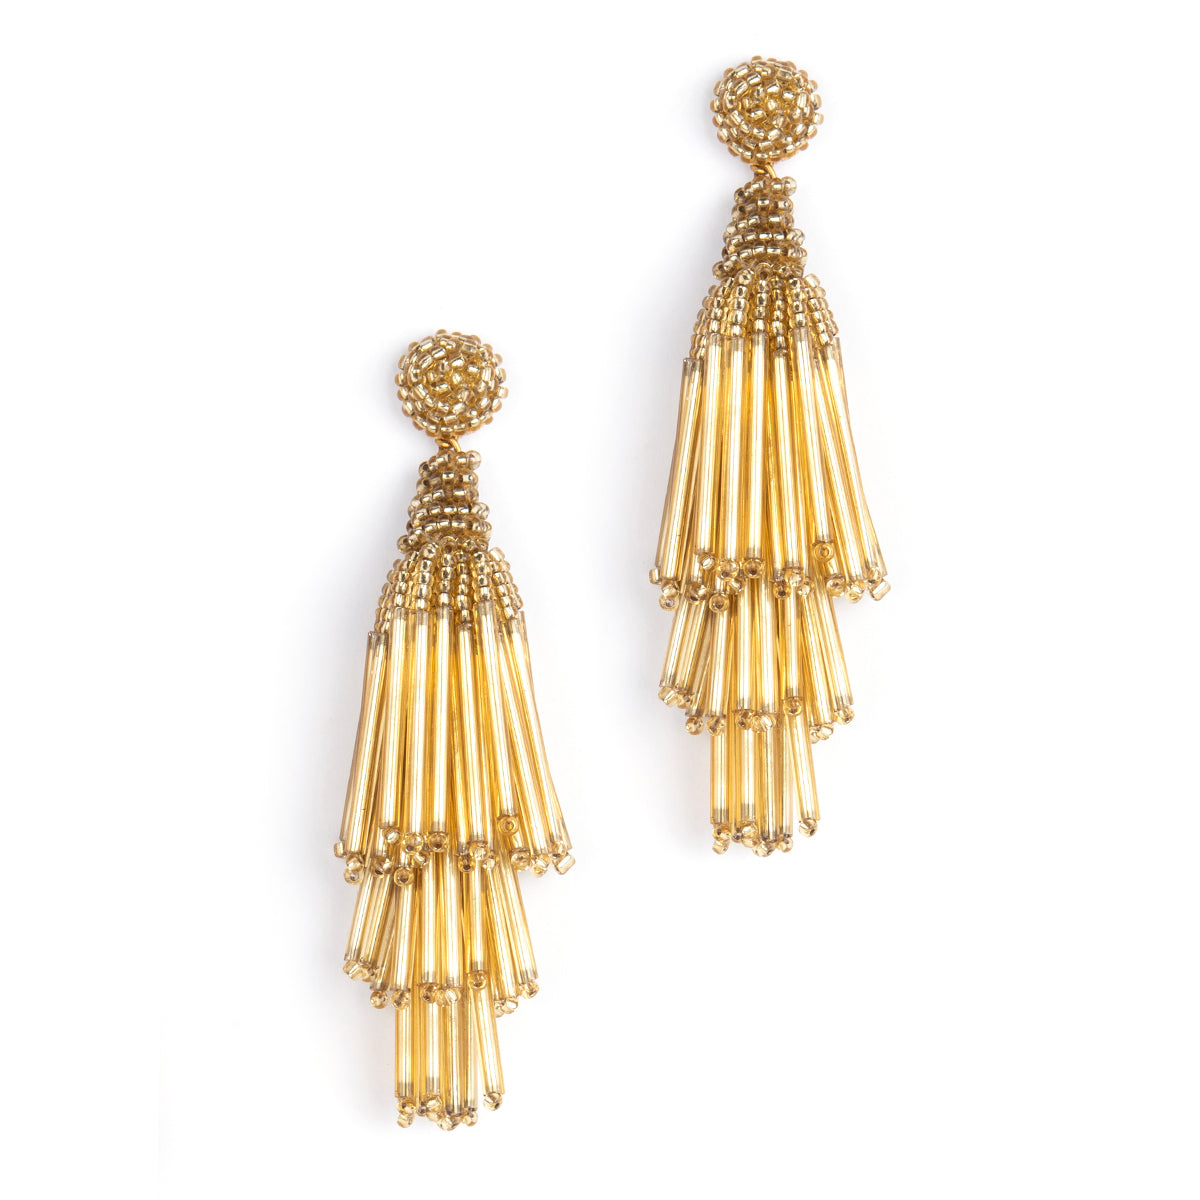 Gold Earrings - Plain Floral Design Stud Drops 01-09 - SPE GOLD - Online  Gold Jewellery Shopping Store in Poonamallee